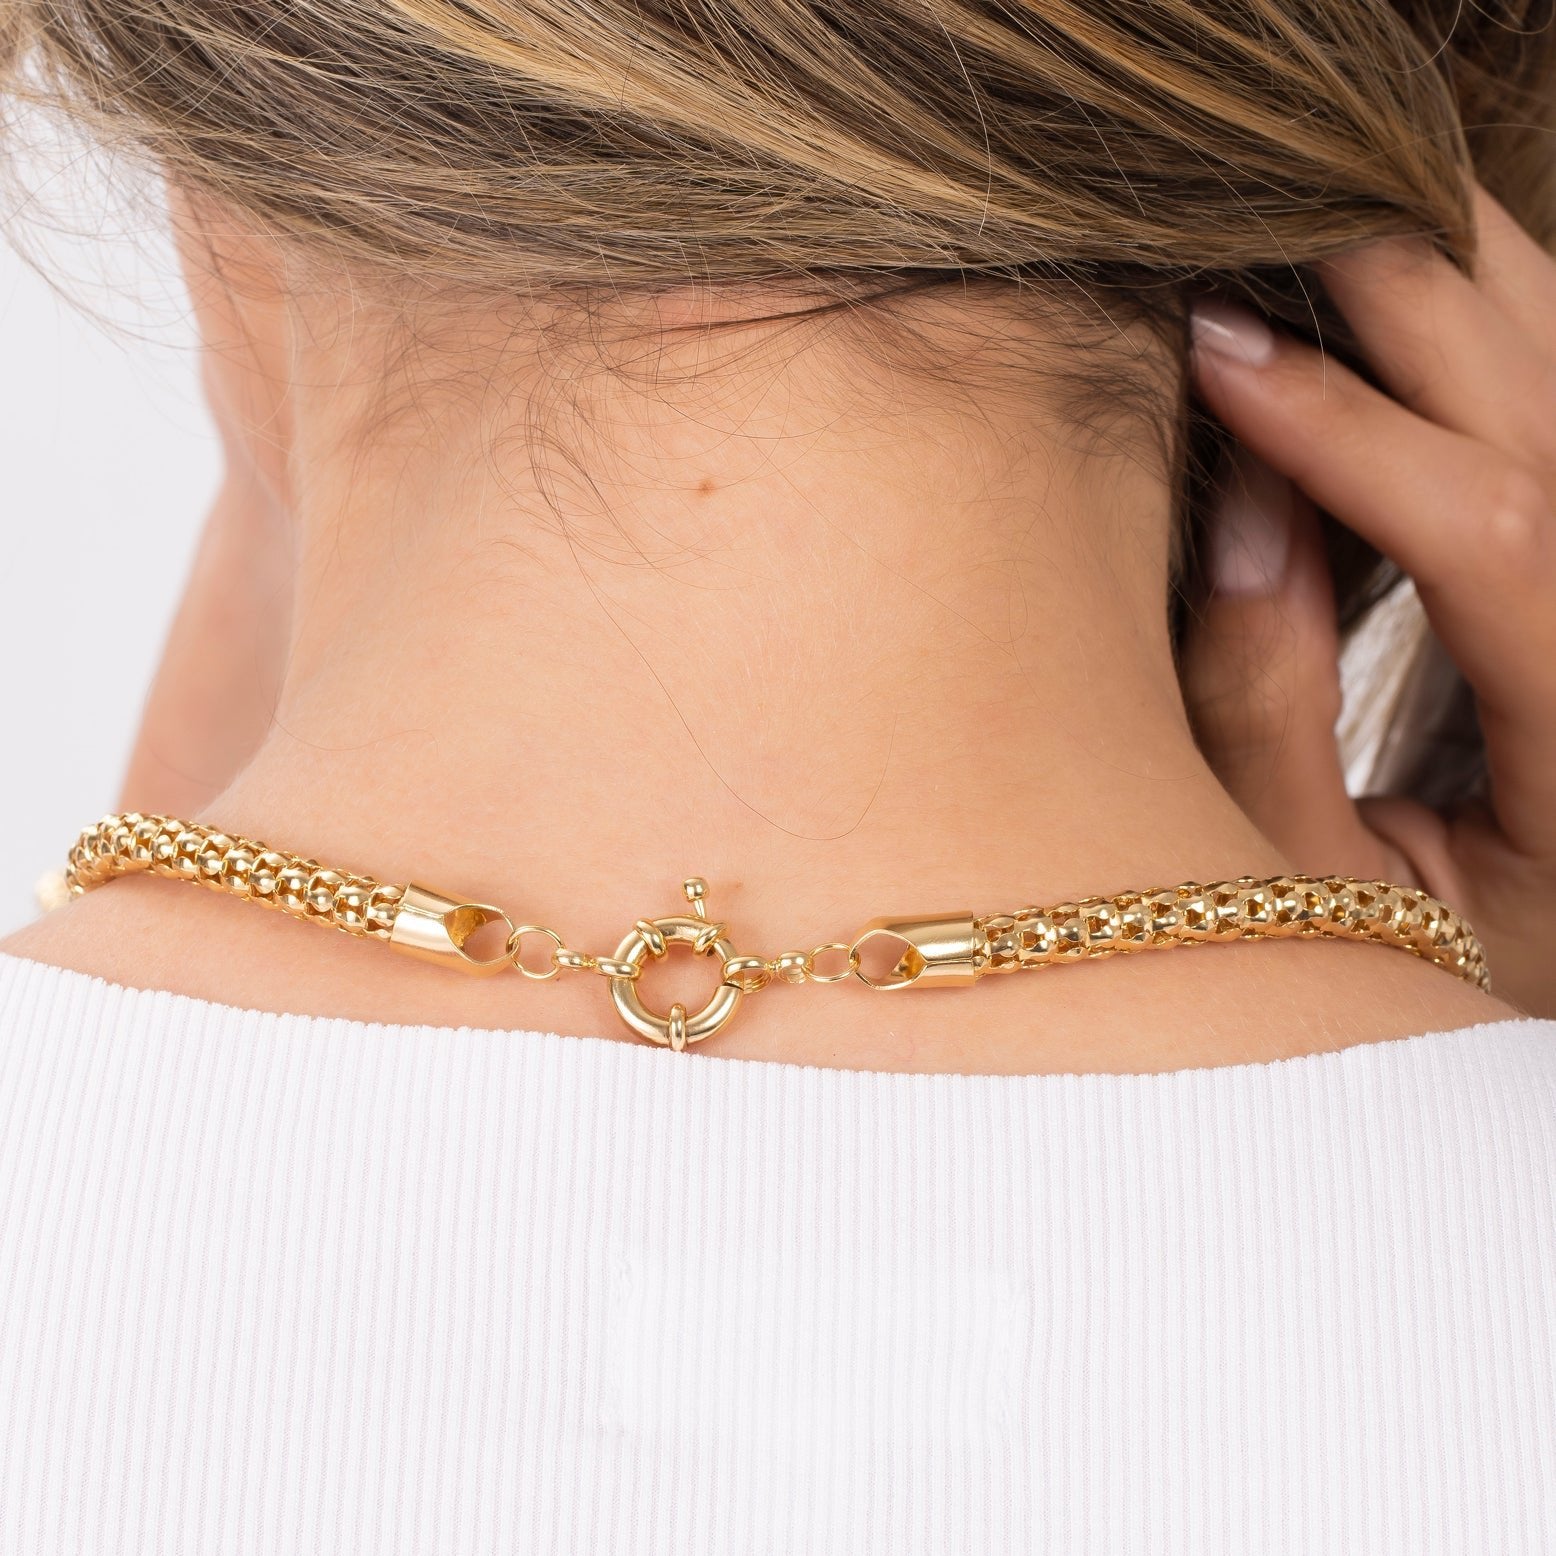 18k Gold Plated Italian Popcorn link Necklace